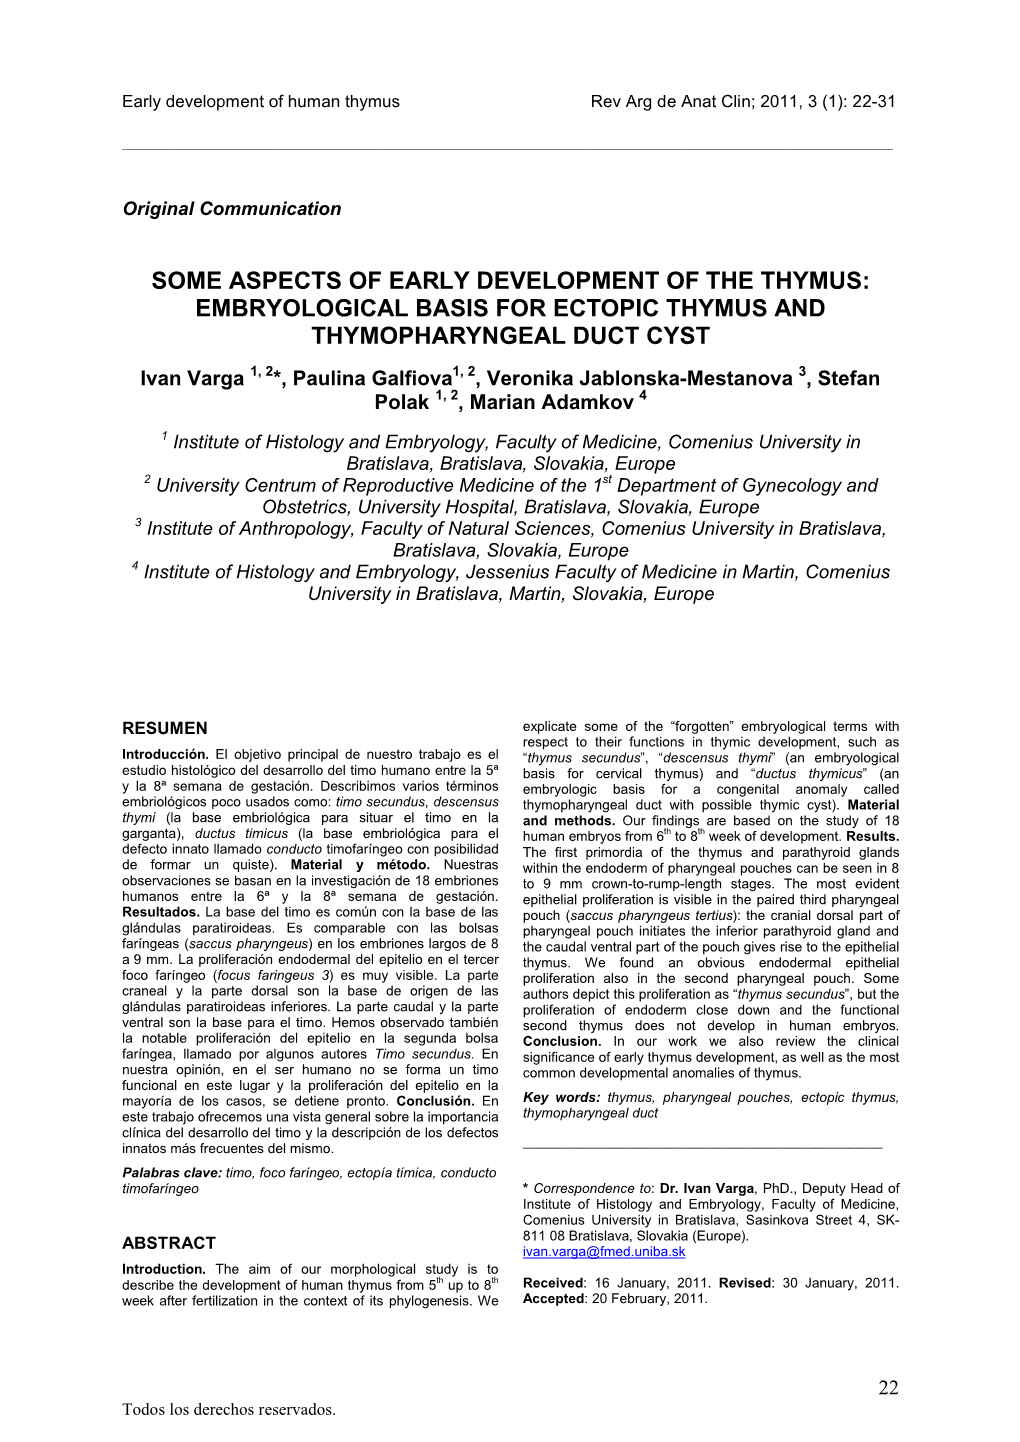 Some Aspects of Early Development of the Thymus: Embryological Basis for Ectopic Thymus and Thymopharyngeal Duct Cyst